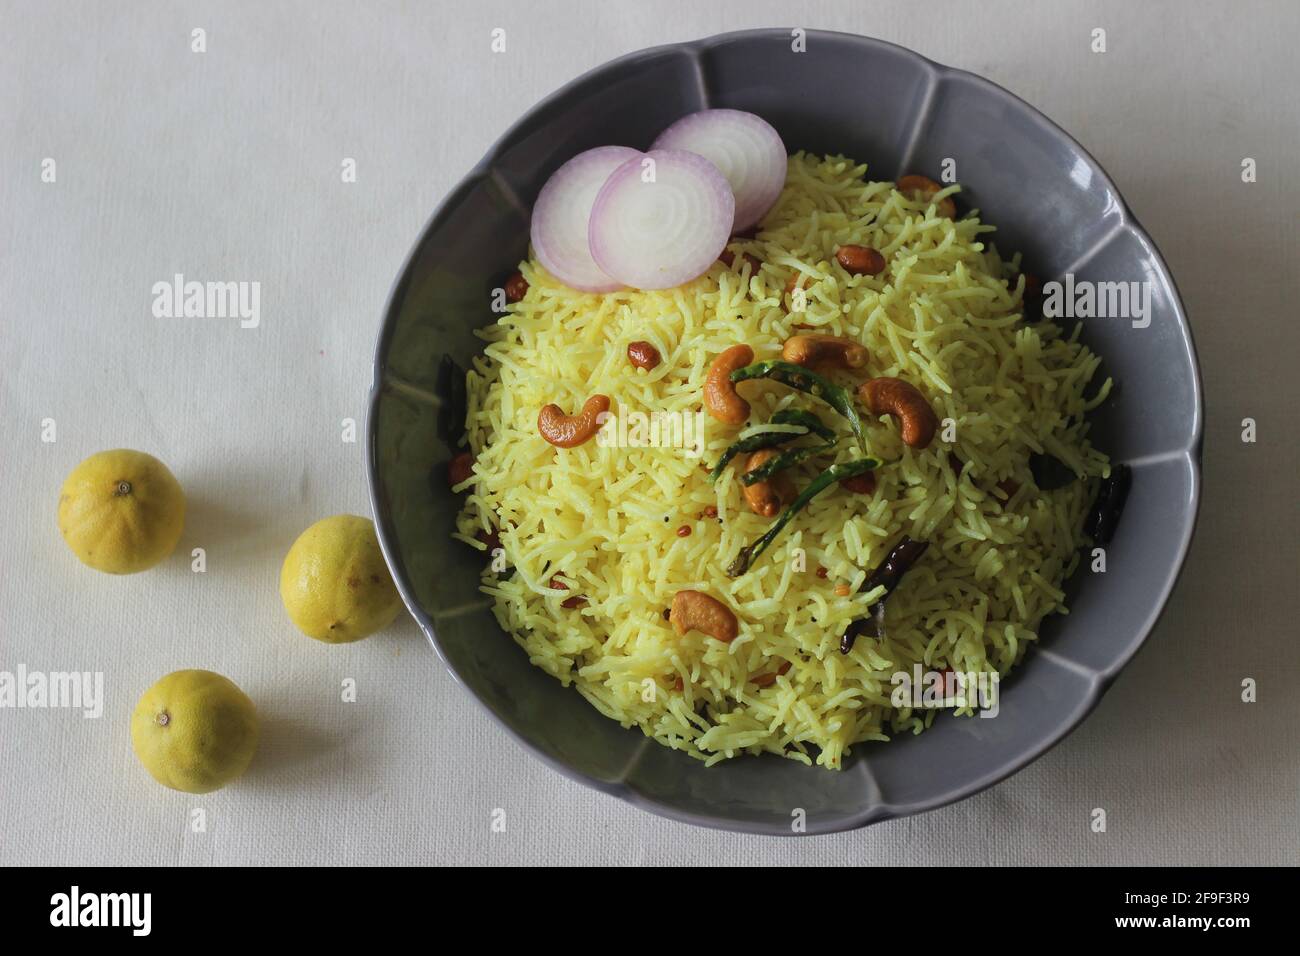 Lemon rice prepared by seasoning cooked rice with mustard seeds, fried lentils, peanuts, cashew nuts, green chillies, dry red chillies, curry leaves, Stock Photo